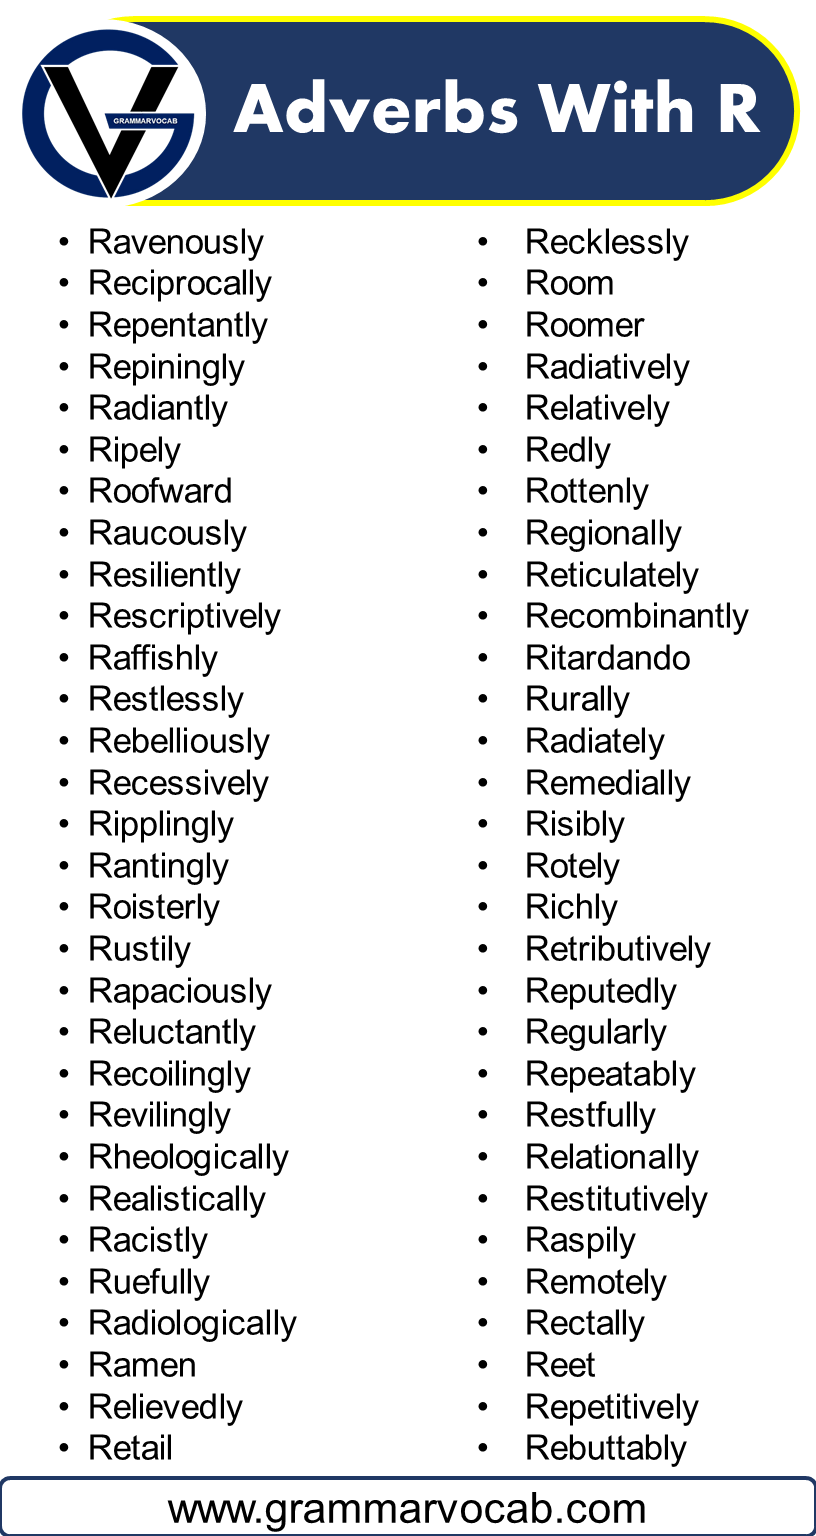 Adverbs That Start With R